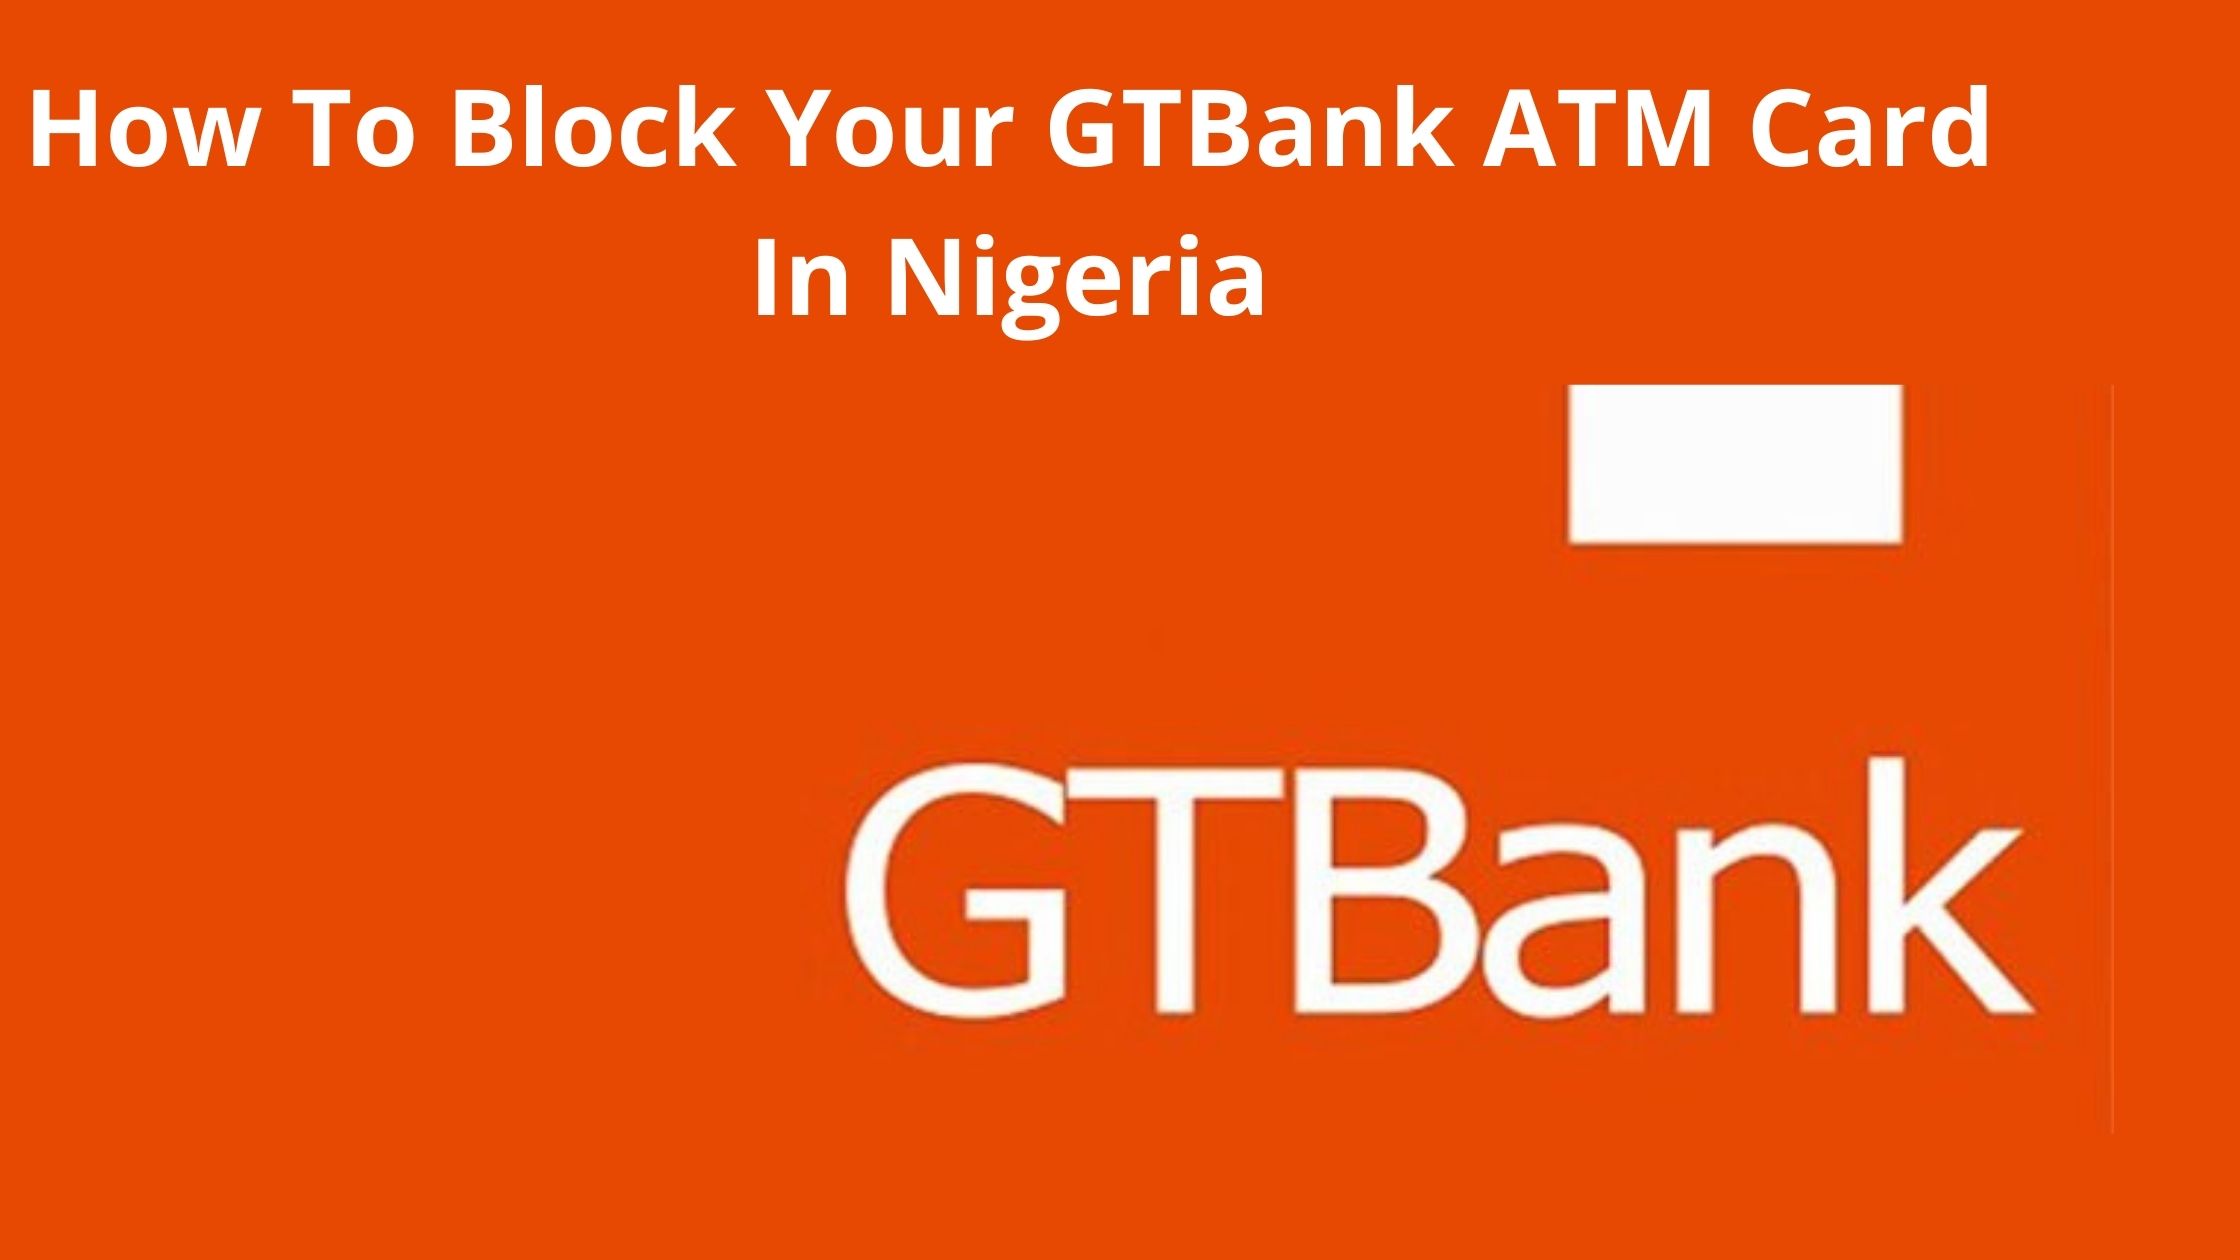 How To Block Your GTBank ATM Card In Nigeria, 2022 Guide